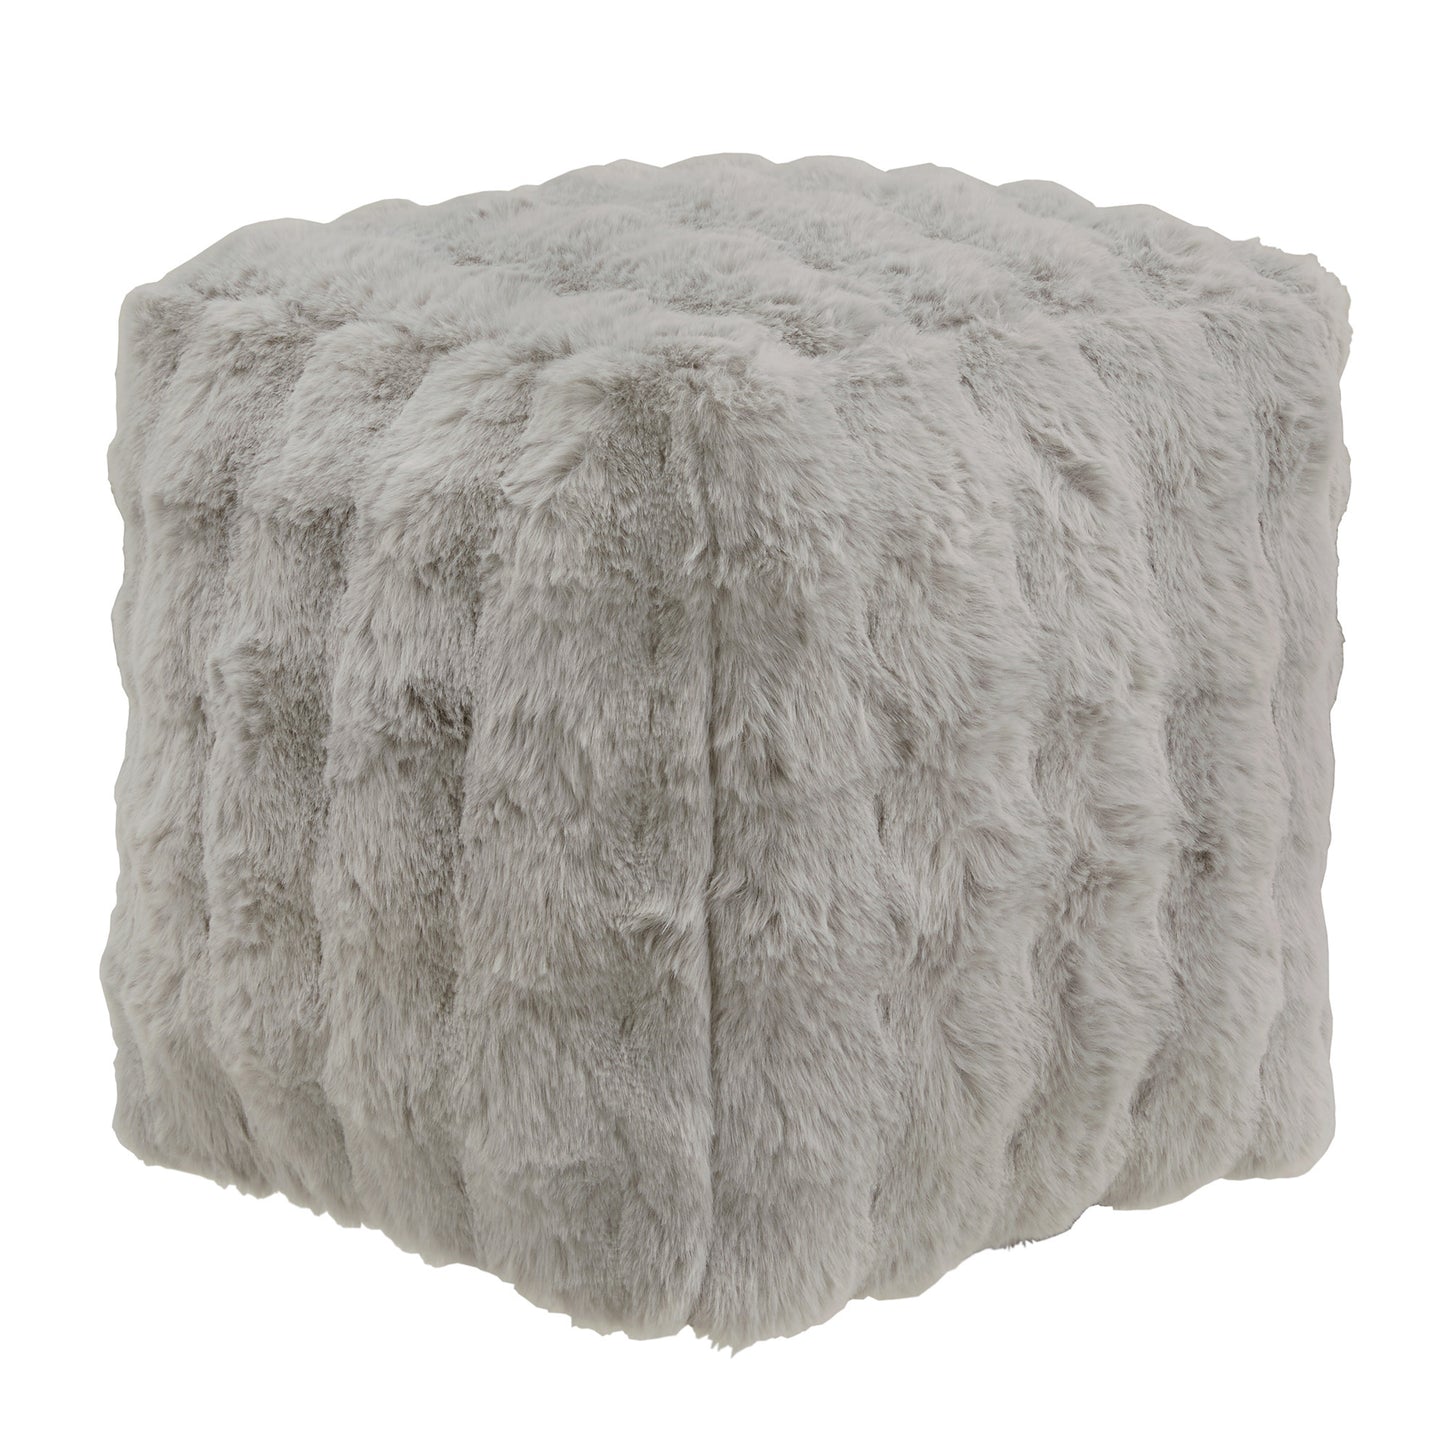 Upholstered Square Pouf Ottoman - Grey Square Furry Fabric